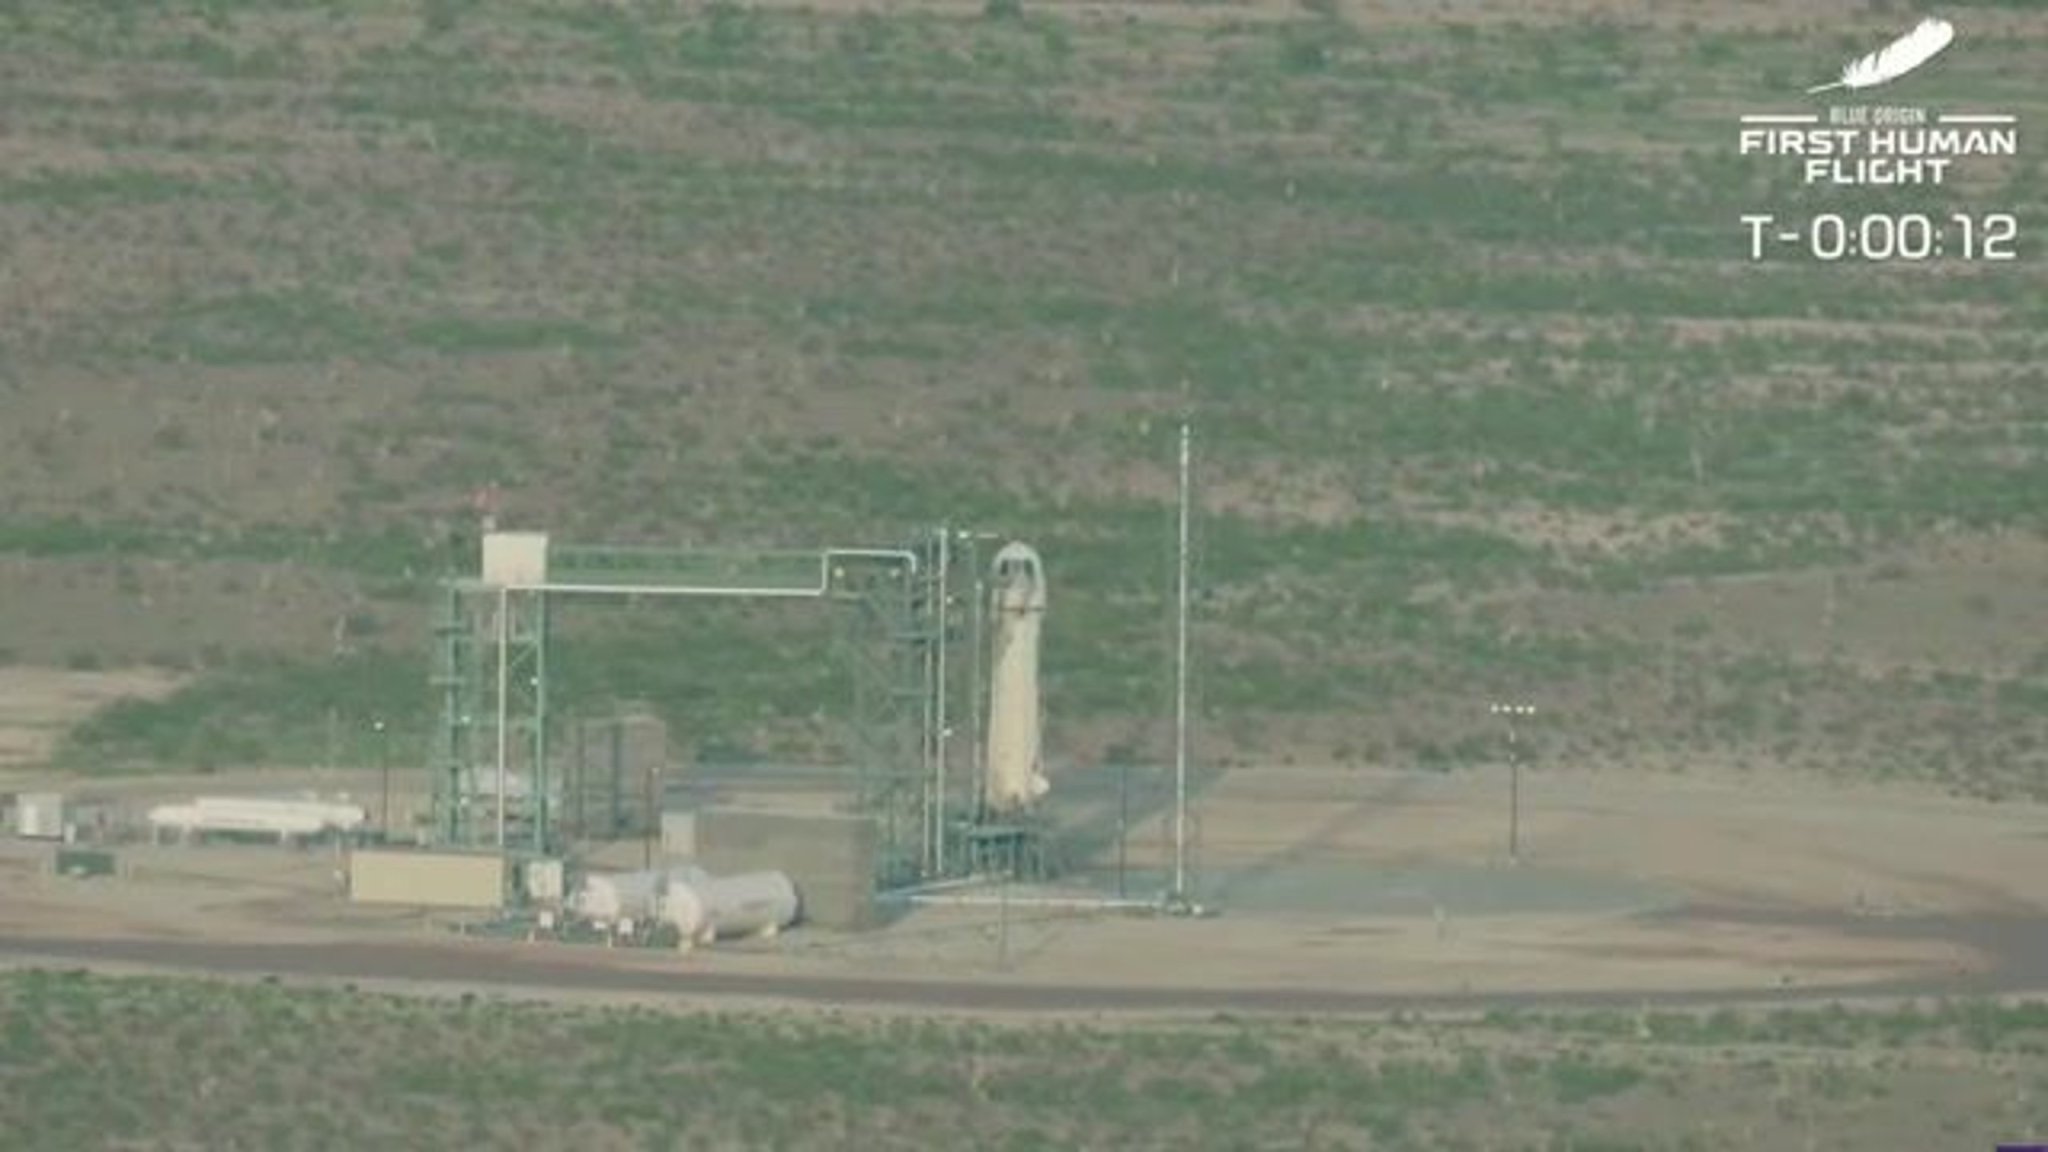 Blue Origin rocket launches for flight to the edge of space with Amazon founder Jeff Bezos and his brother Mark Bezos.